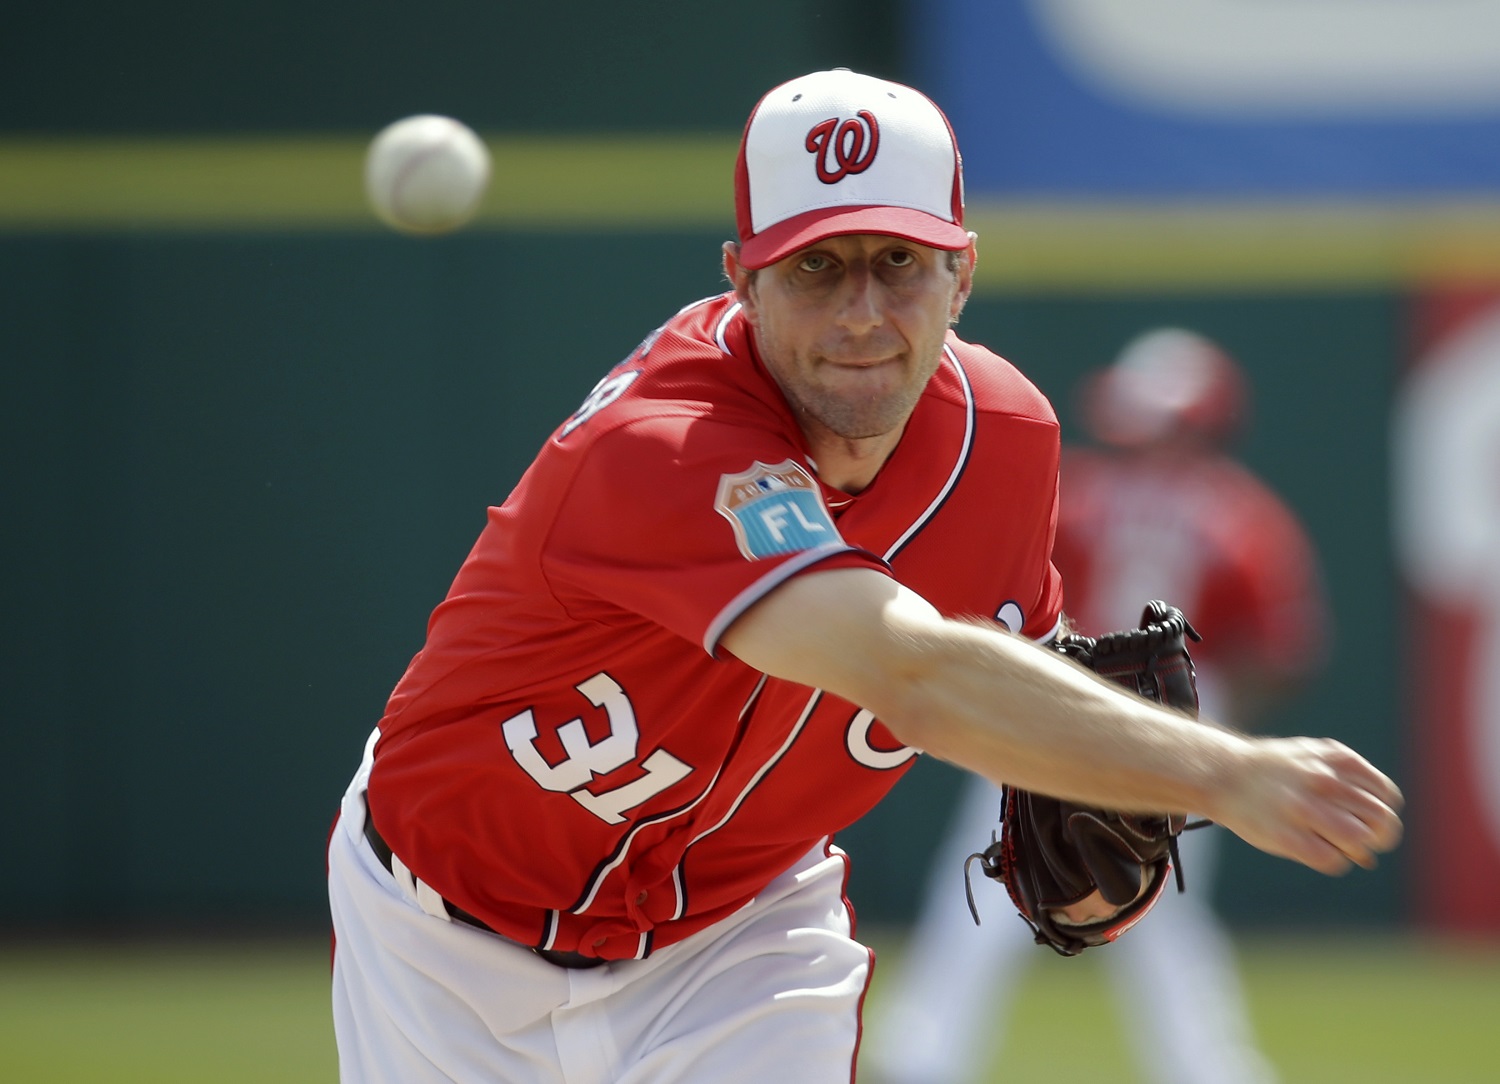 Washington Nationals starting pitcher Max Scherzer throws before a spring training baseball game against the New York Mets, Thursday, March 3, 2016, in Viera, Fla. (AP Photo/John Raoux)